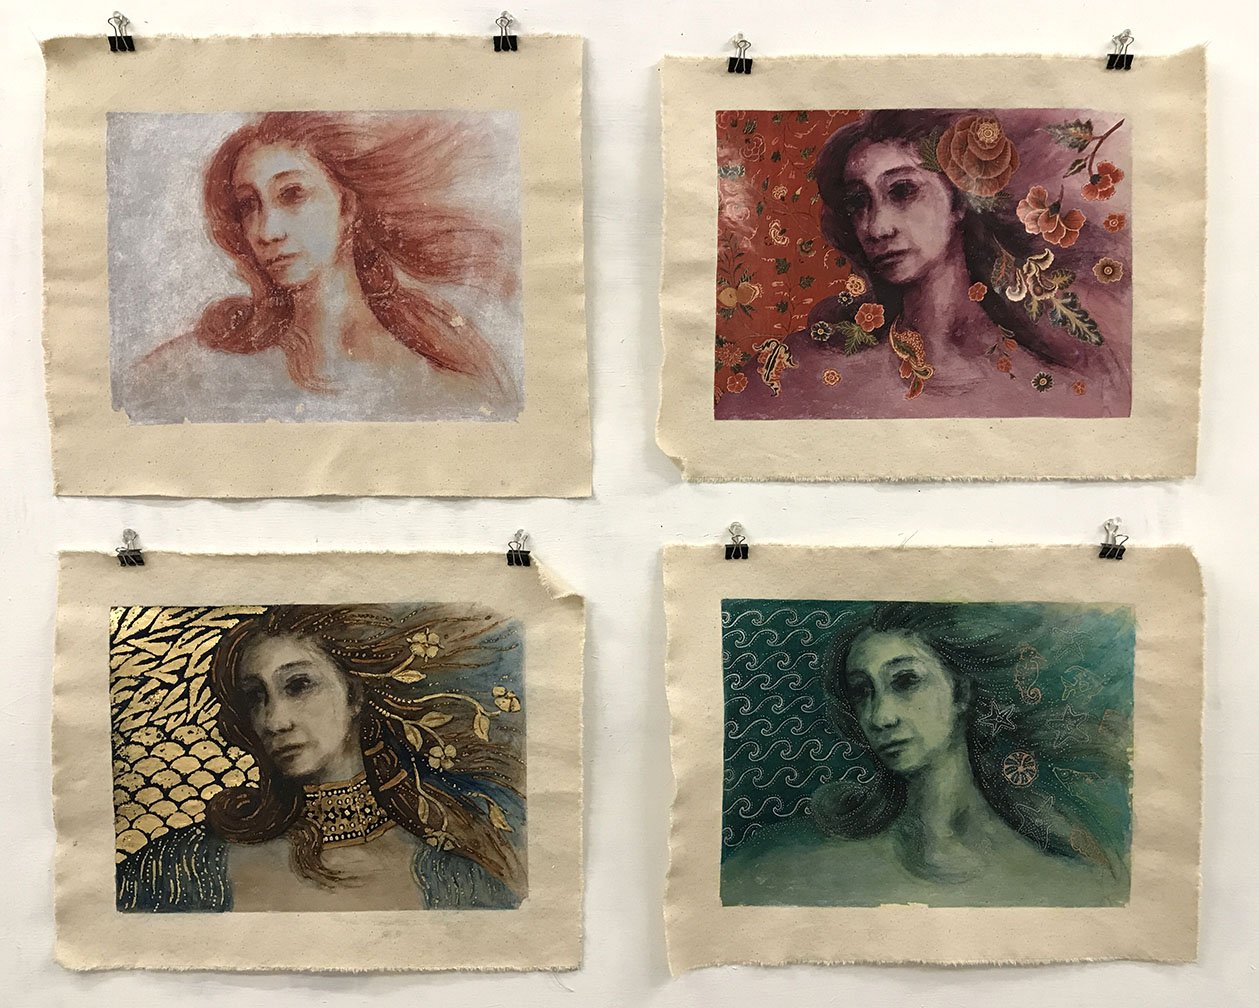 The Final Pieces: Series of 4 / Quadriptych in progress